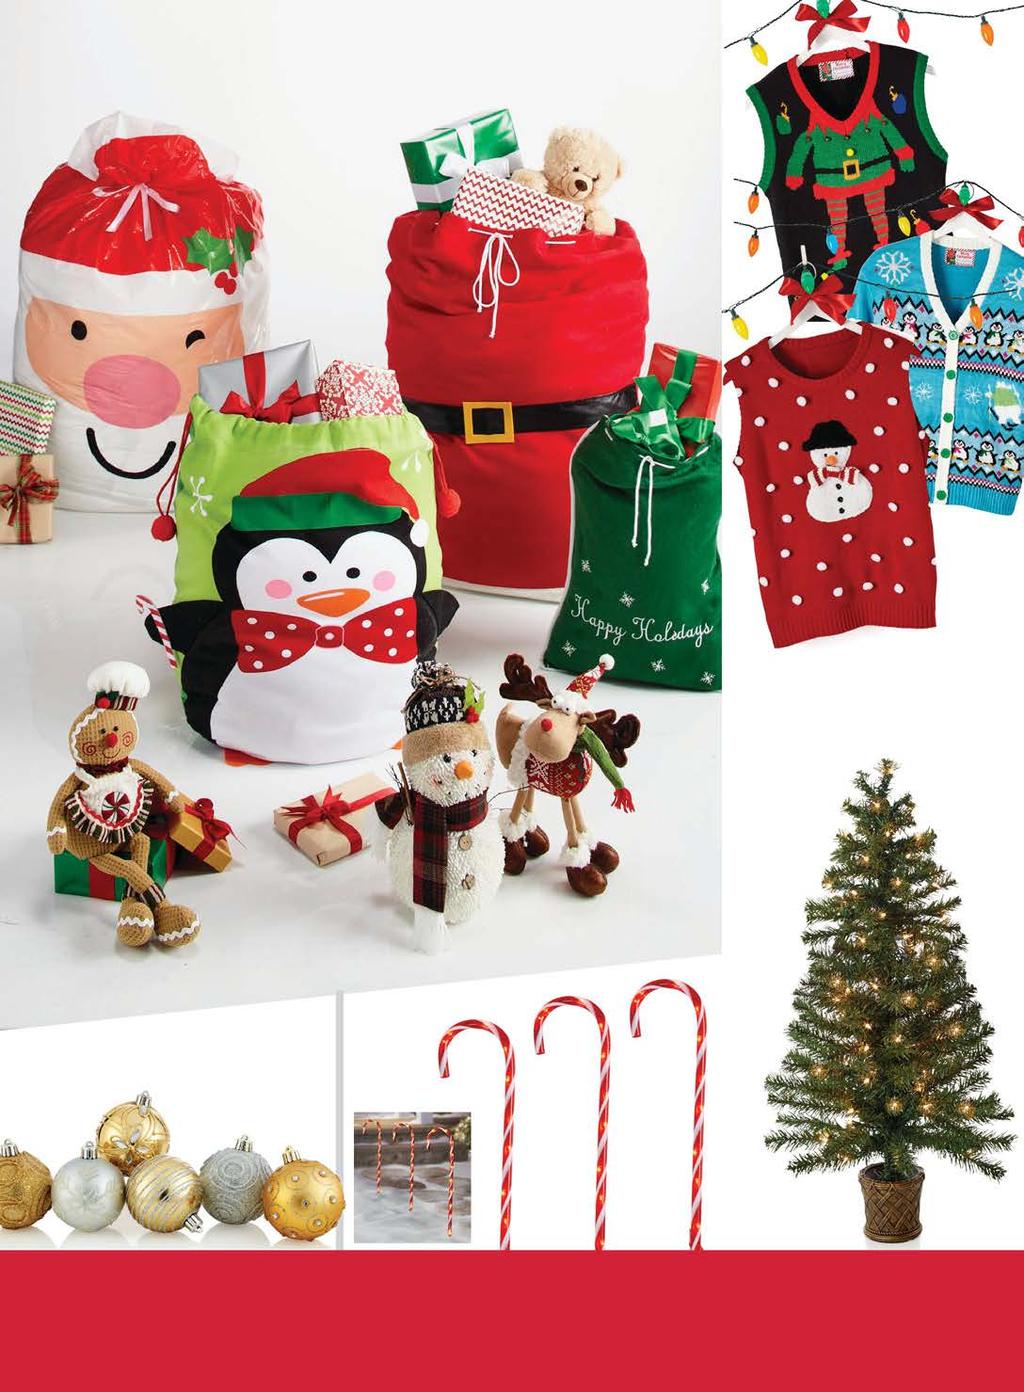 OH WHAT JOY it is to GIVE! 1 99 Jumbo Plastic Sacks For big or hard-to-wrap gifts. 5 99 Embroidered Fabric Gift Sacks 12 x 12" to 29" x 40". Also shown: Jumbo Santa Sacks $12.99 ea.